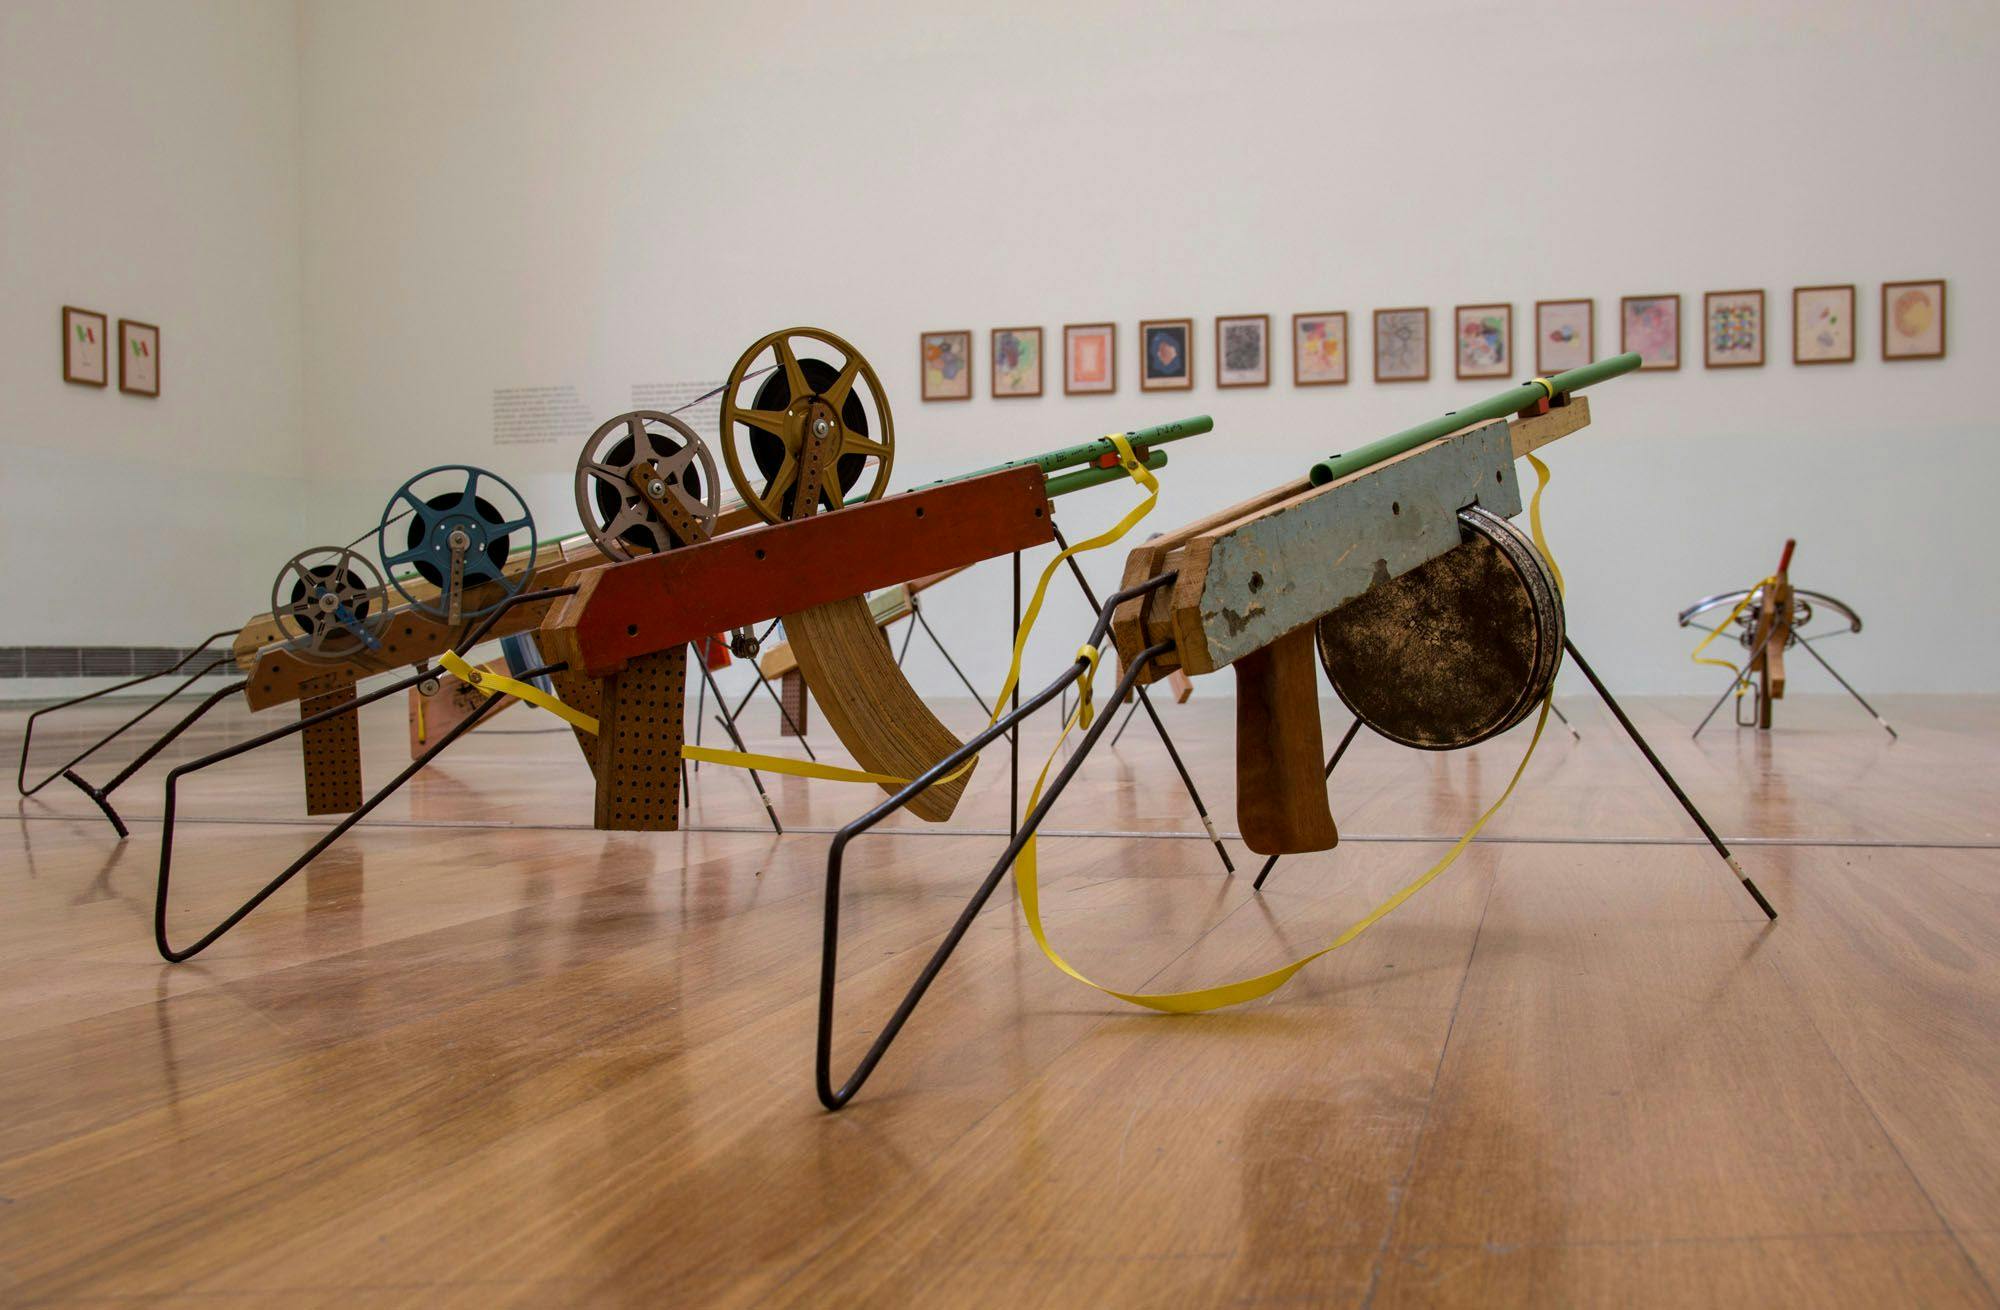 Installation view of the exhibition A Story of Negotiation¬†at Museo de Arte Latinoamericano de Buenos Aires (MALBA) - Fundaci√≥n Costantini, dated 2015 to 2016.